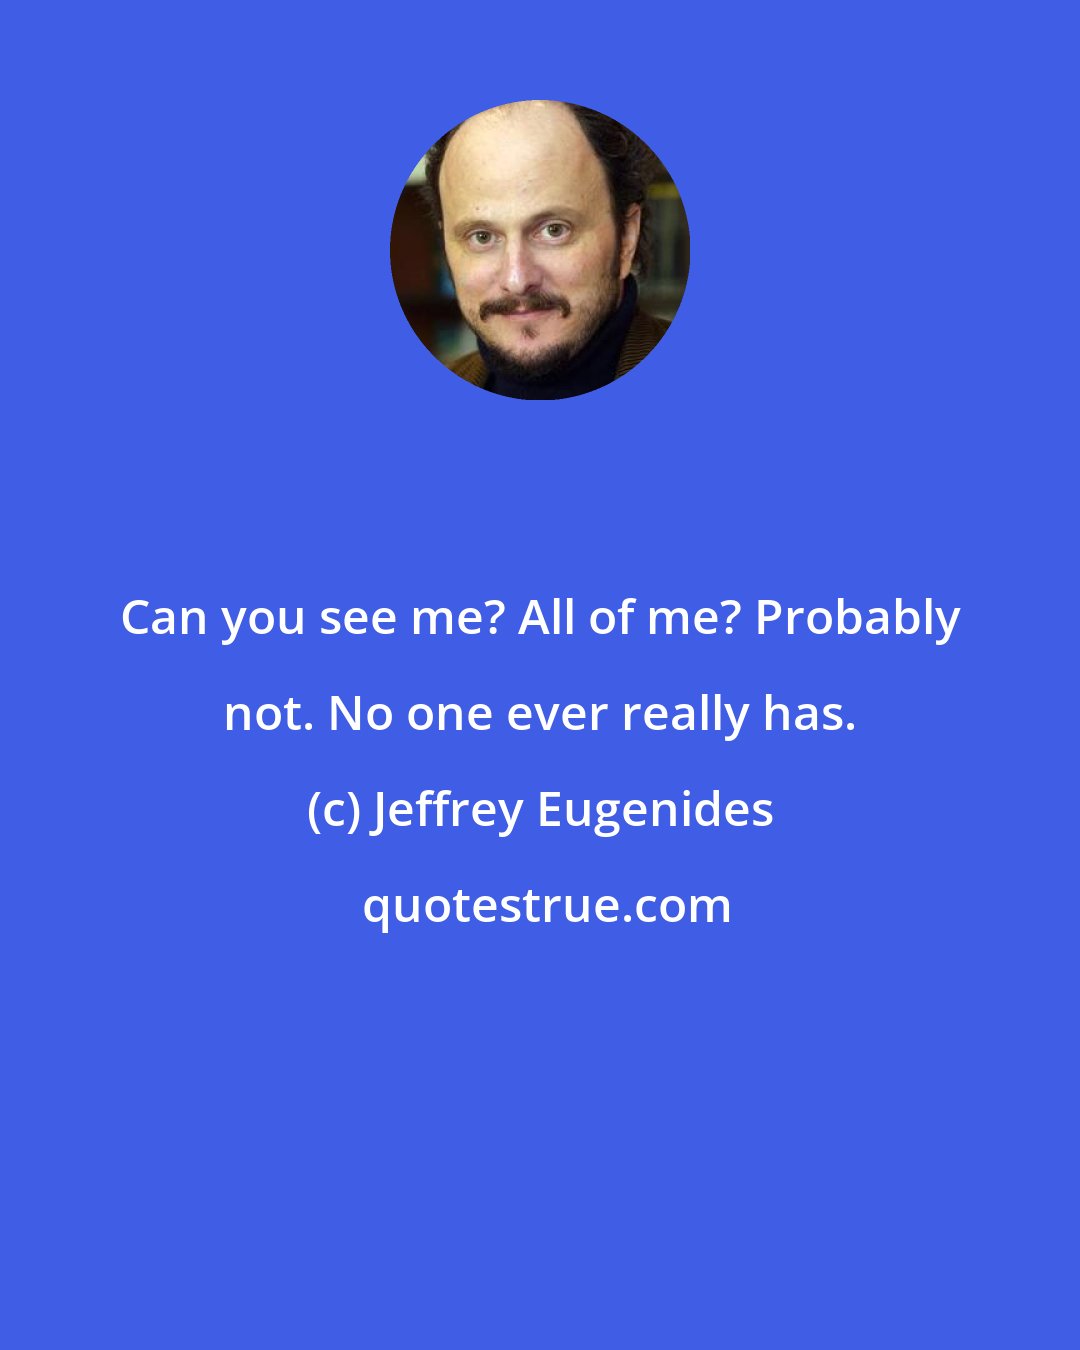 Jeffrey Eugenides: Can you see me? All of me? Probably not. No one ever really has.